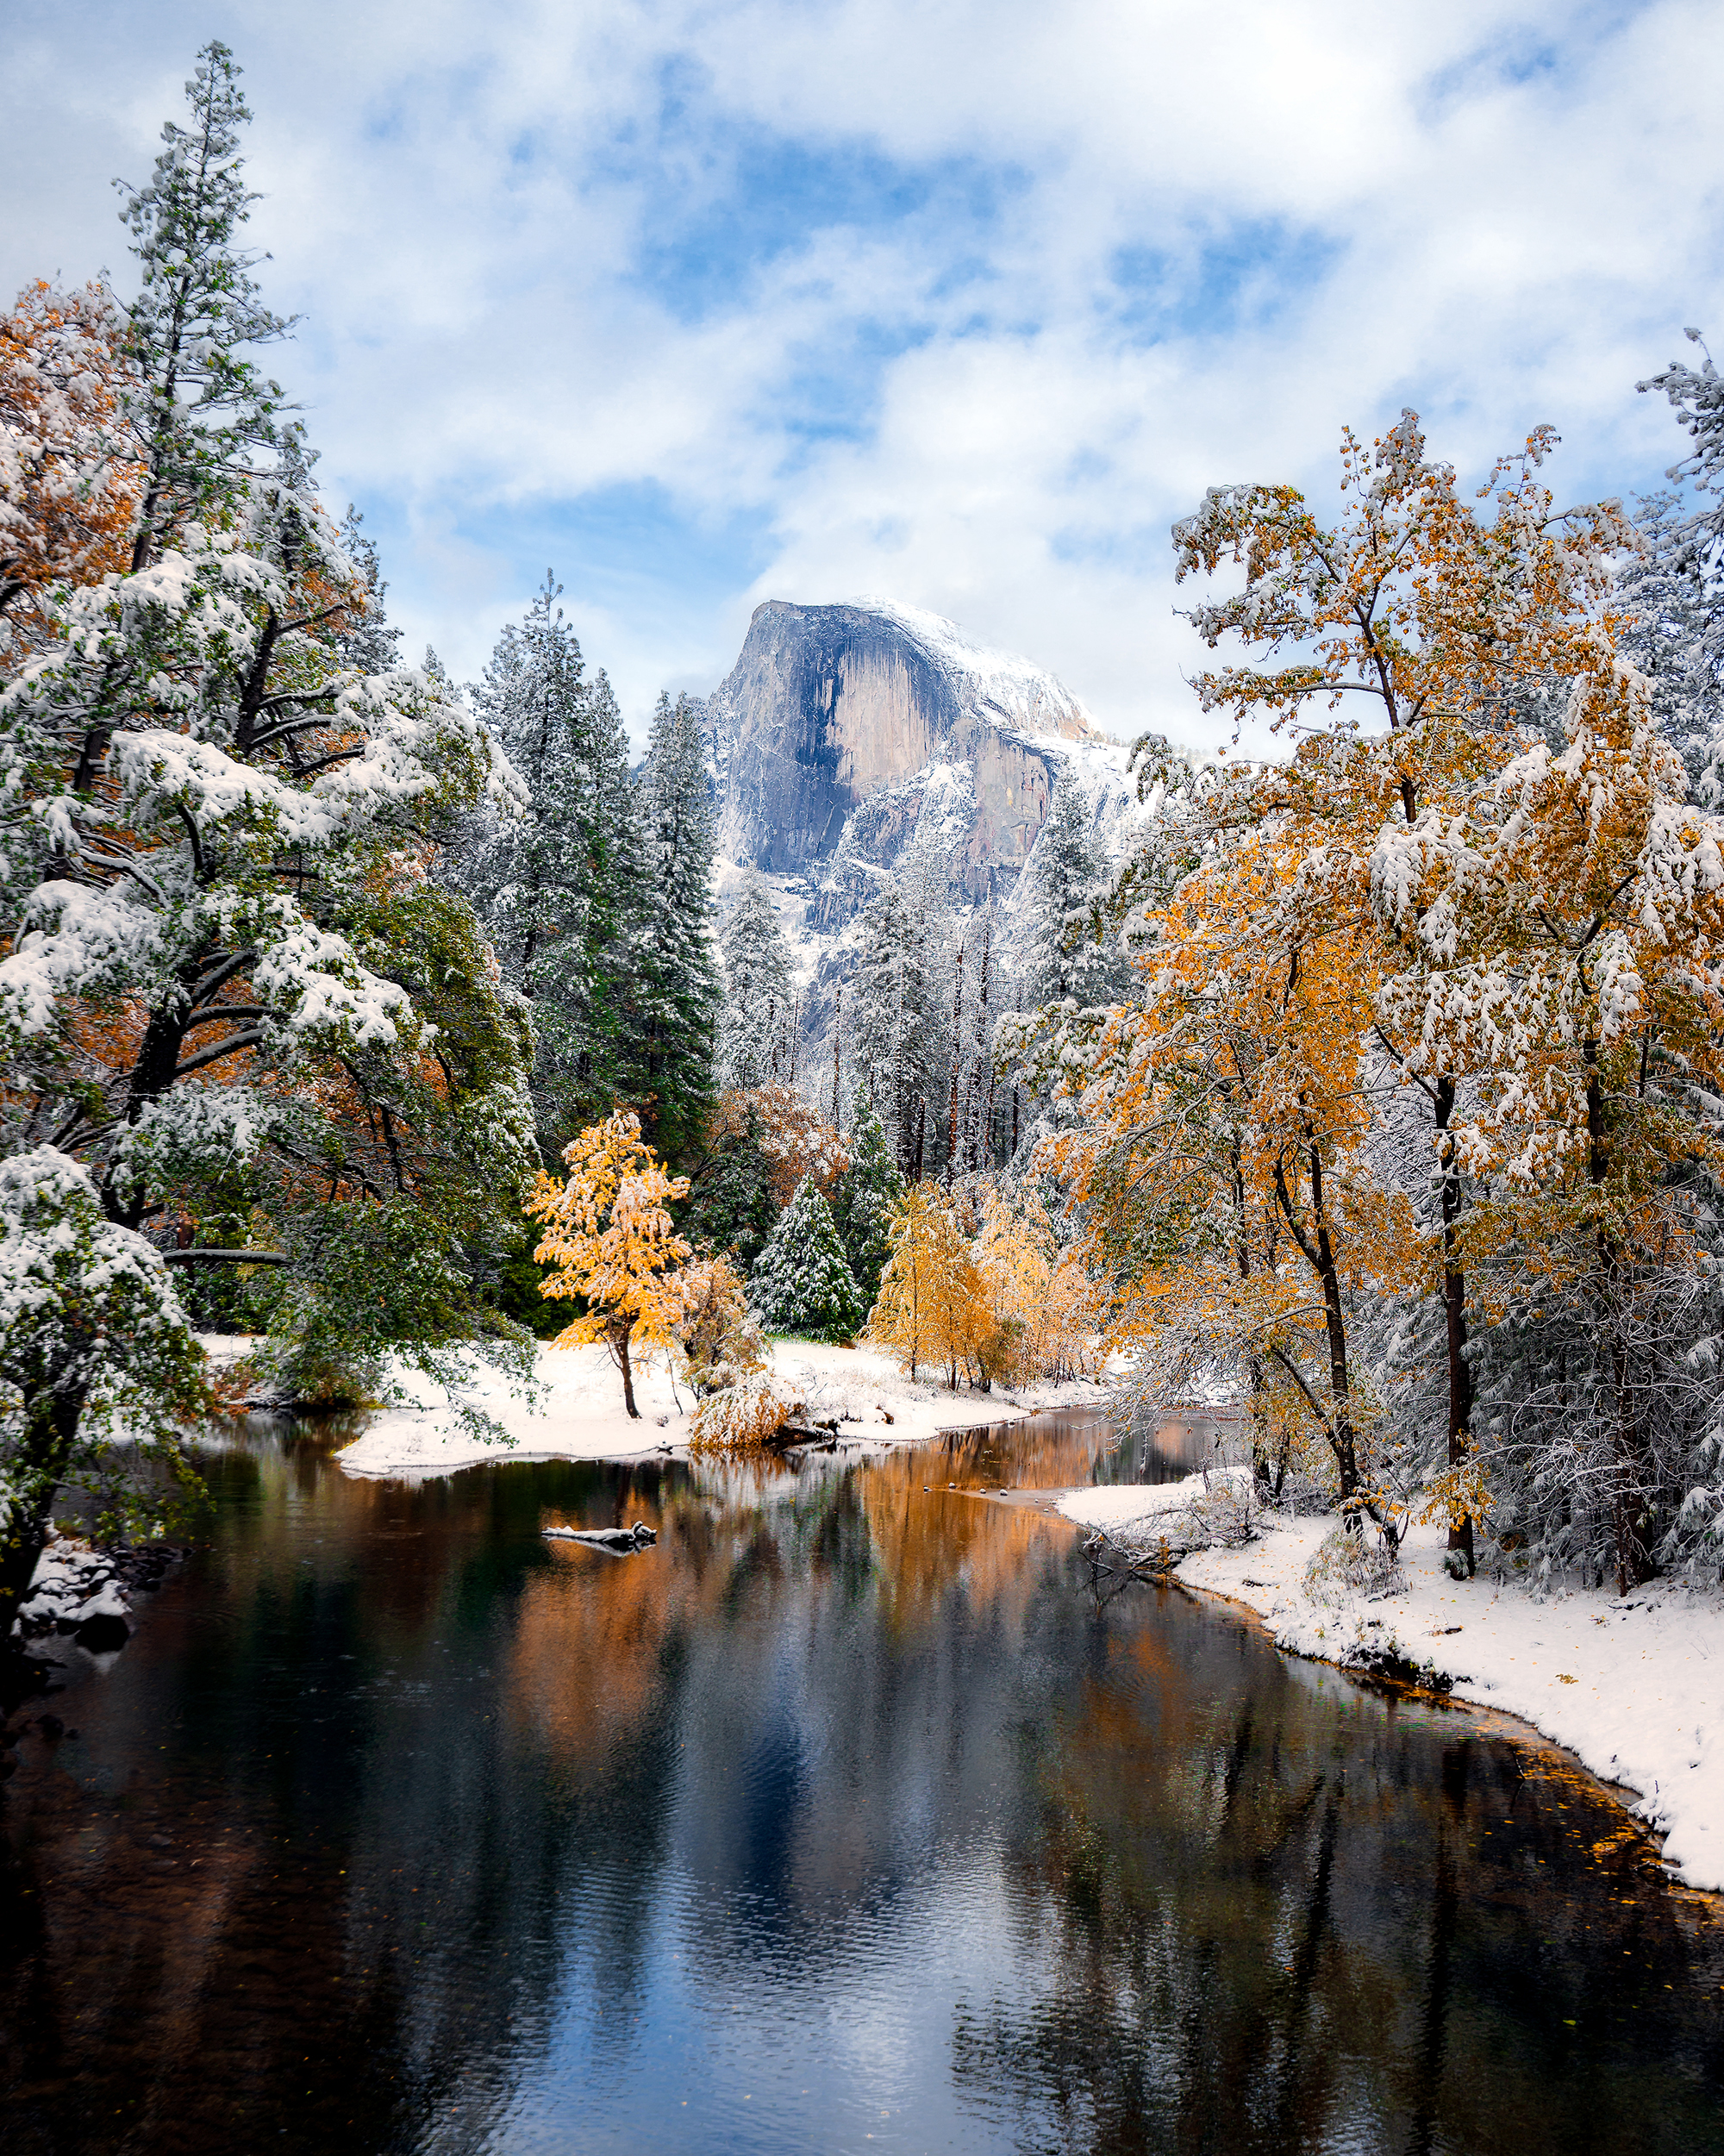 General 2000x2501 nature landscape portrait display trees winter snow lake reflection clouds Yosemite National Park Half Dome